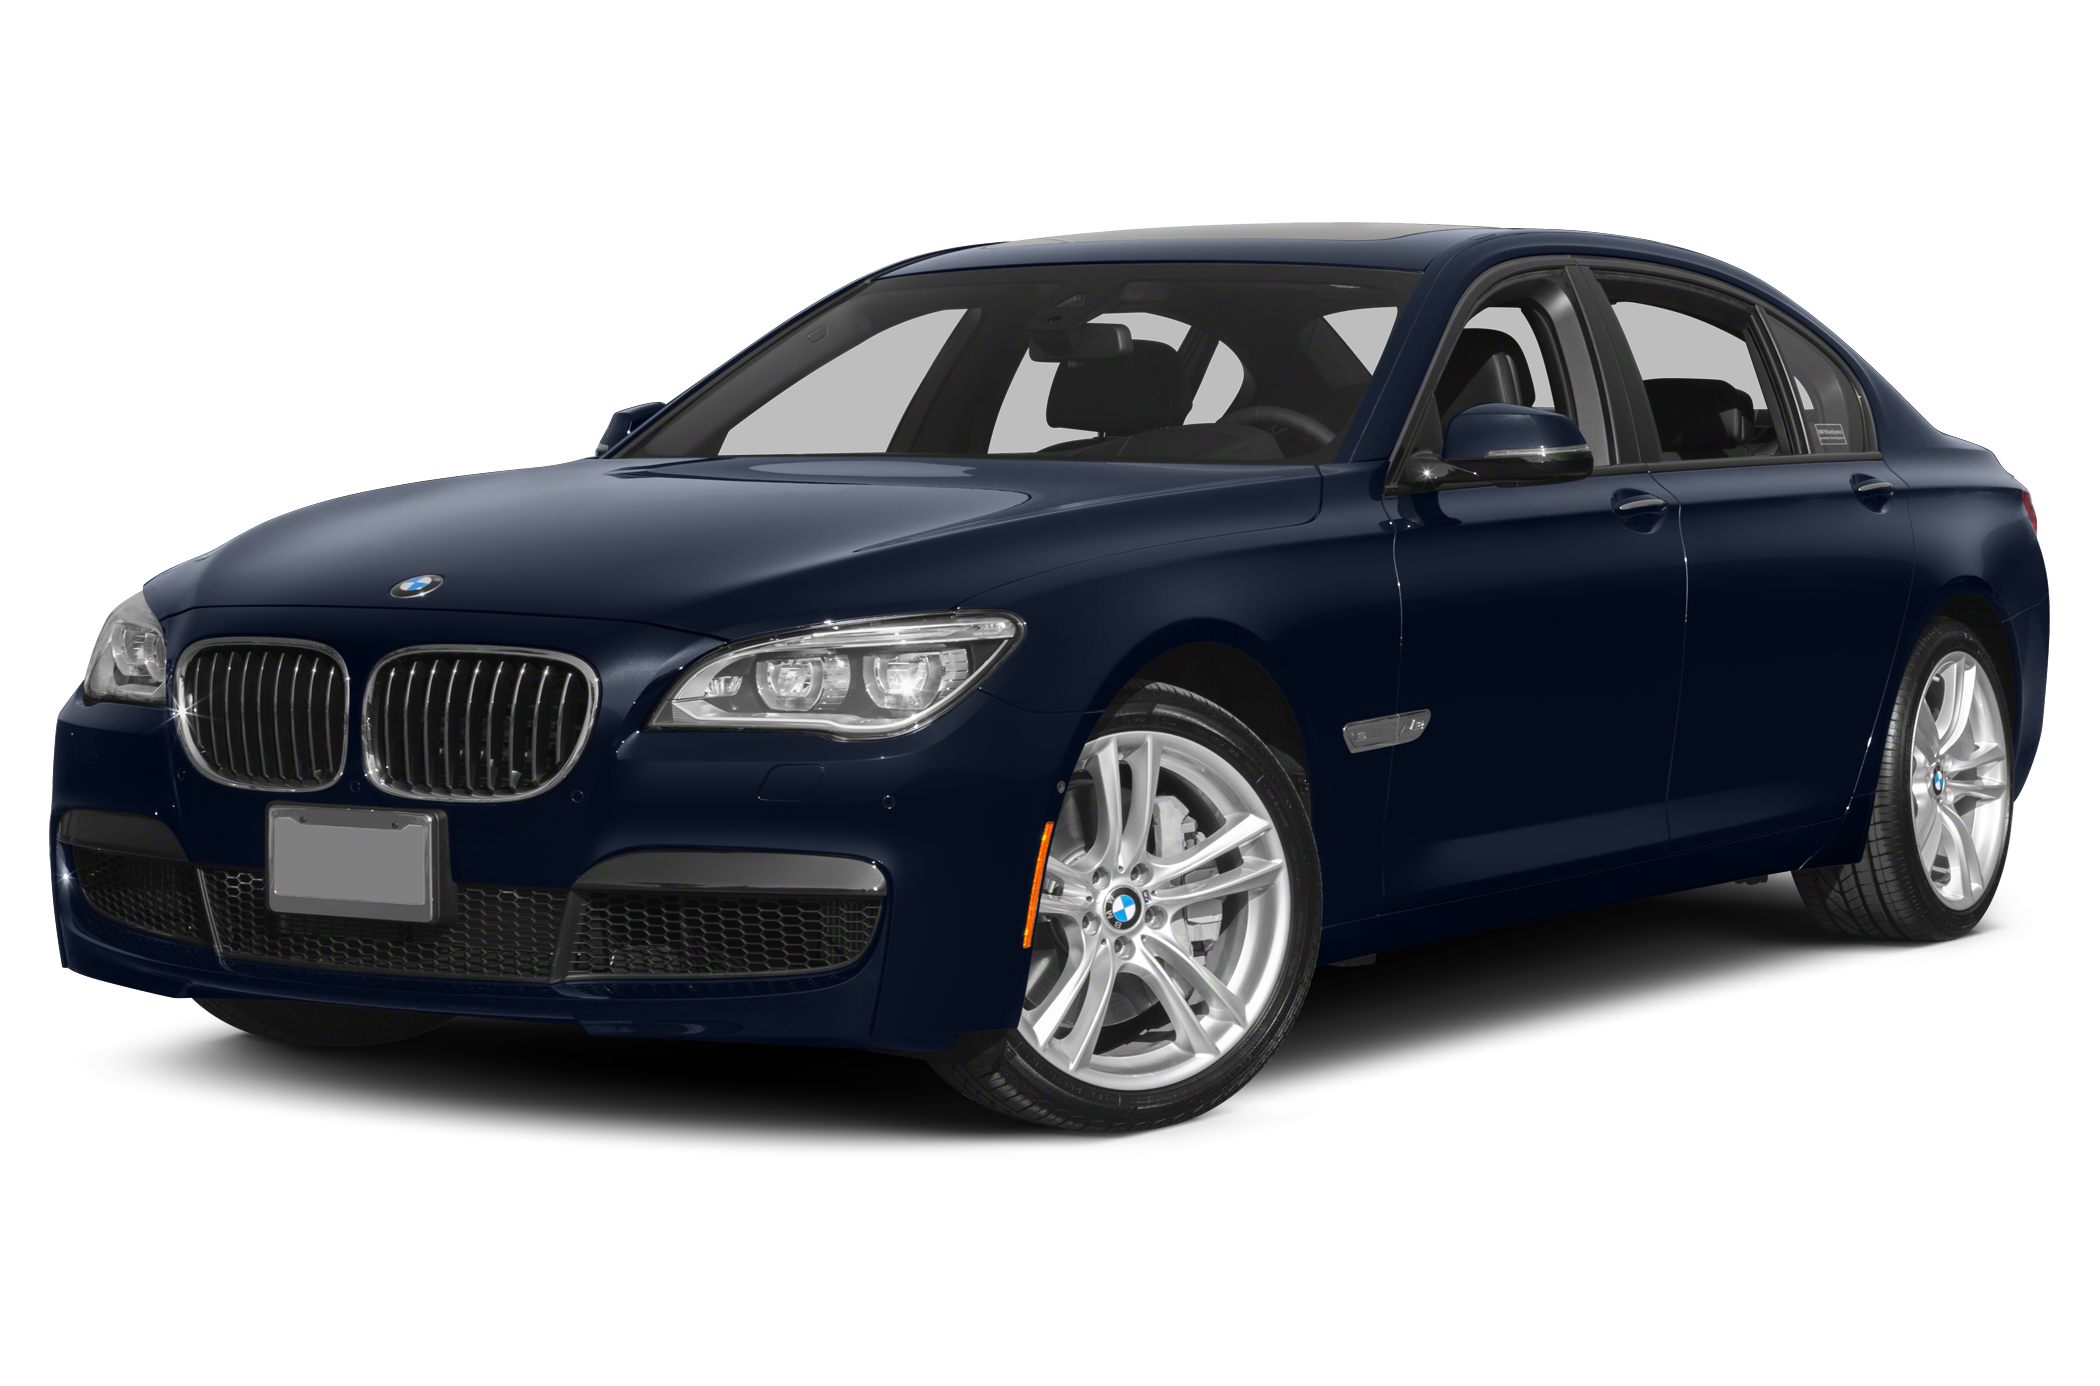 Bmw used cars for sale in columbus ohio #6